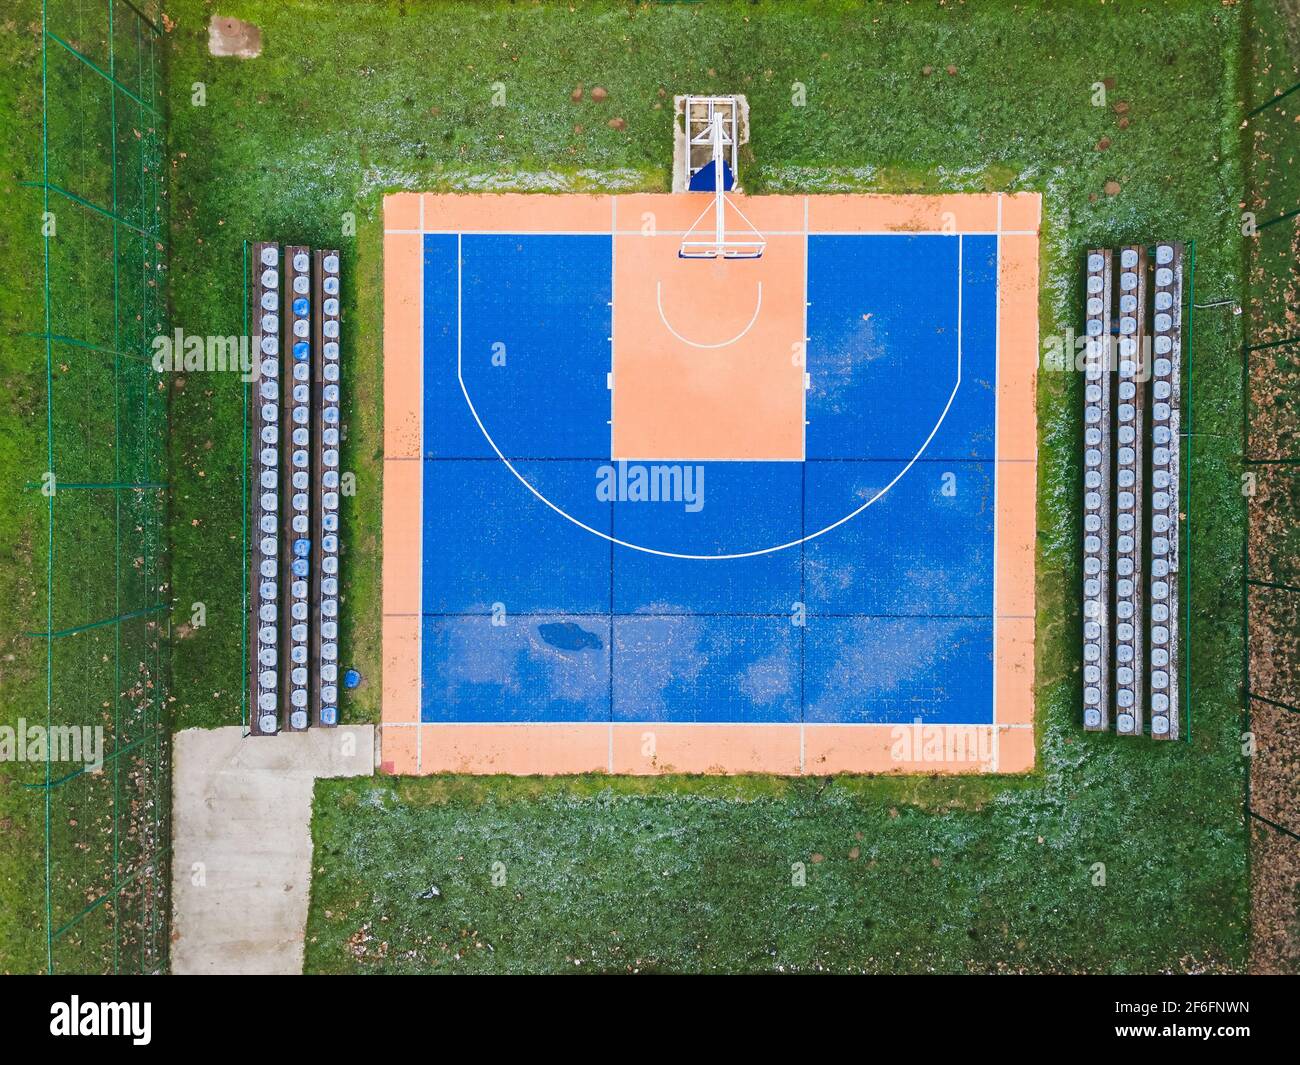 Colorful basketball  field from above. Outdoor sports ground with blue and orange surface for playing basketball,  lamps and benches for spectators Stock Photo